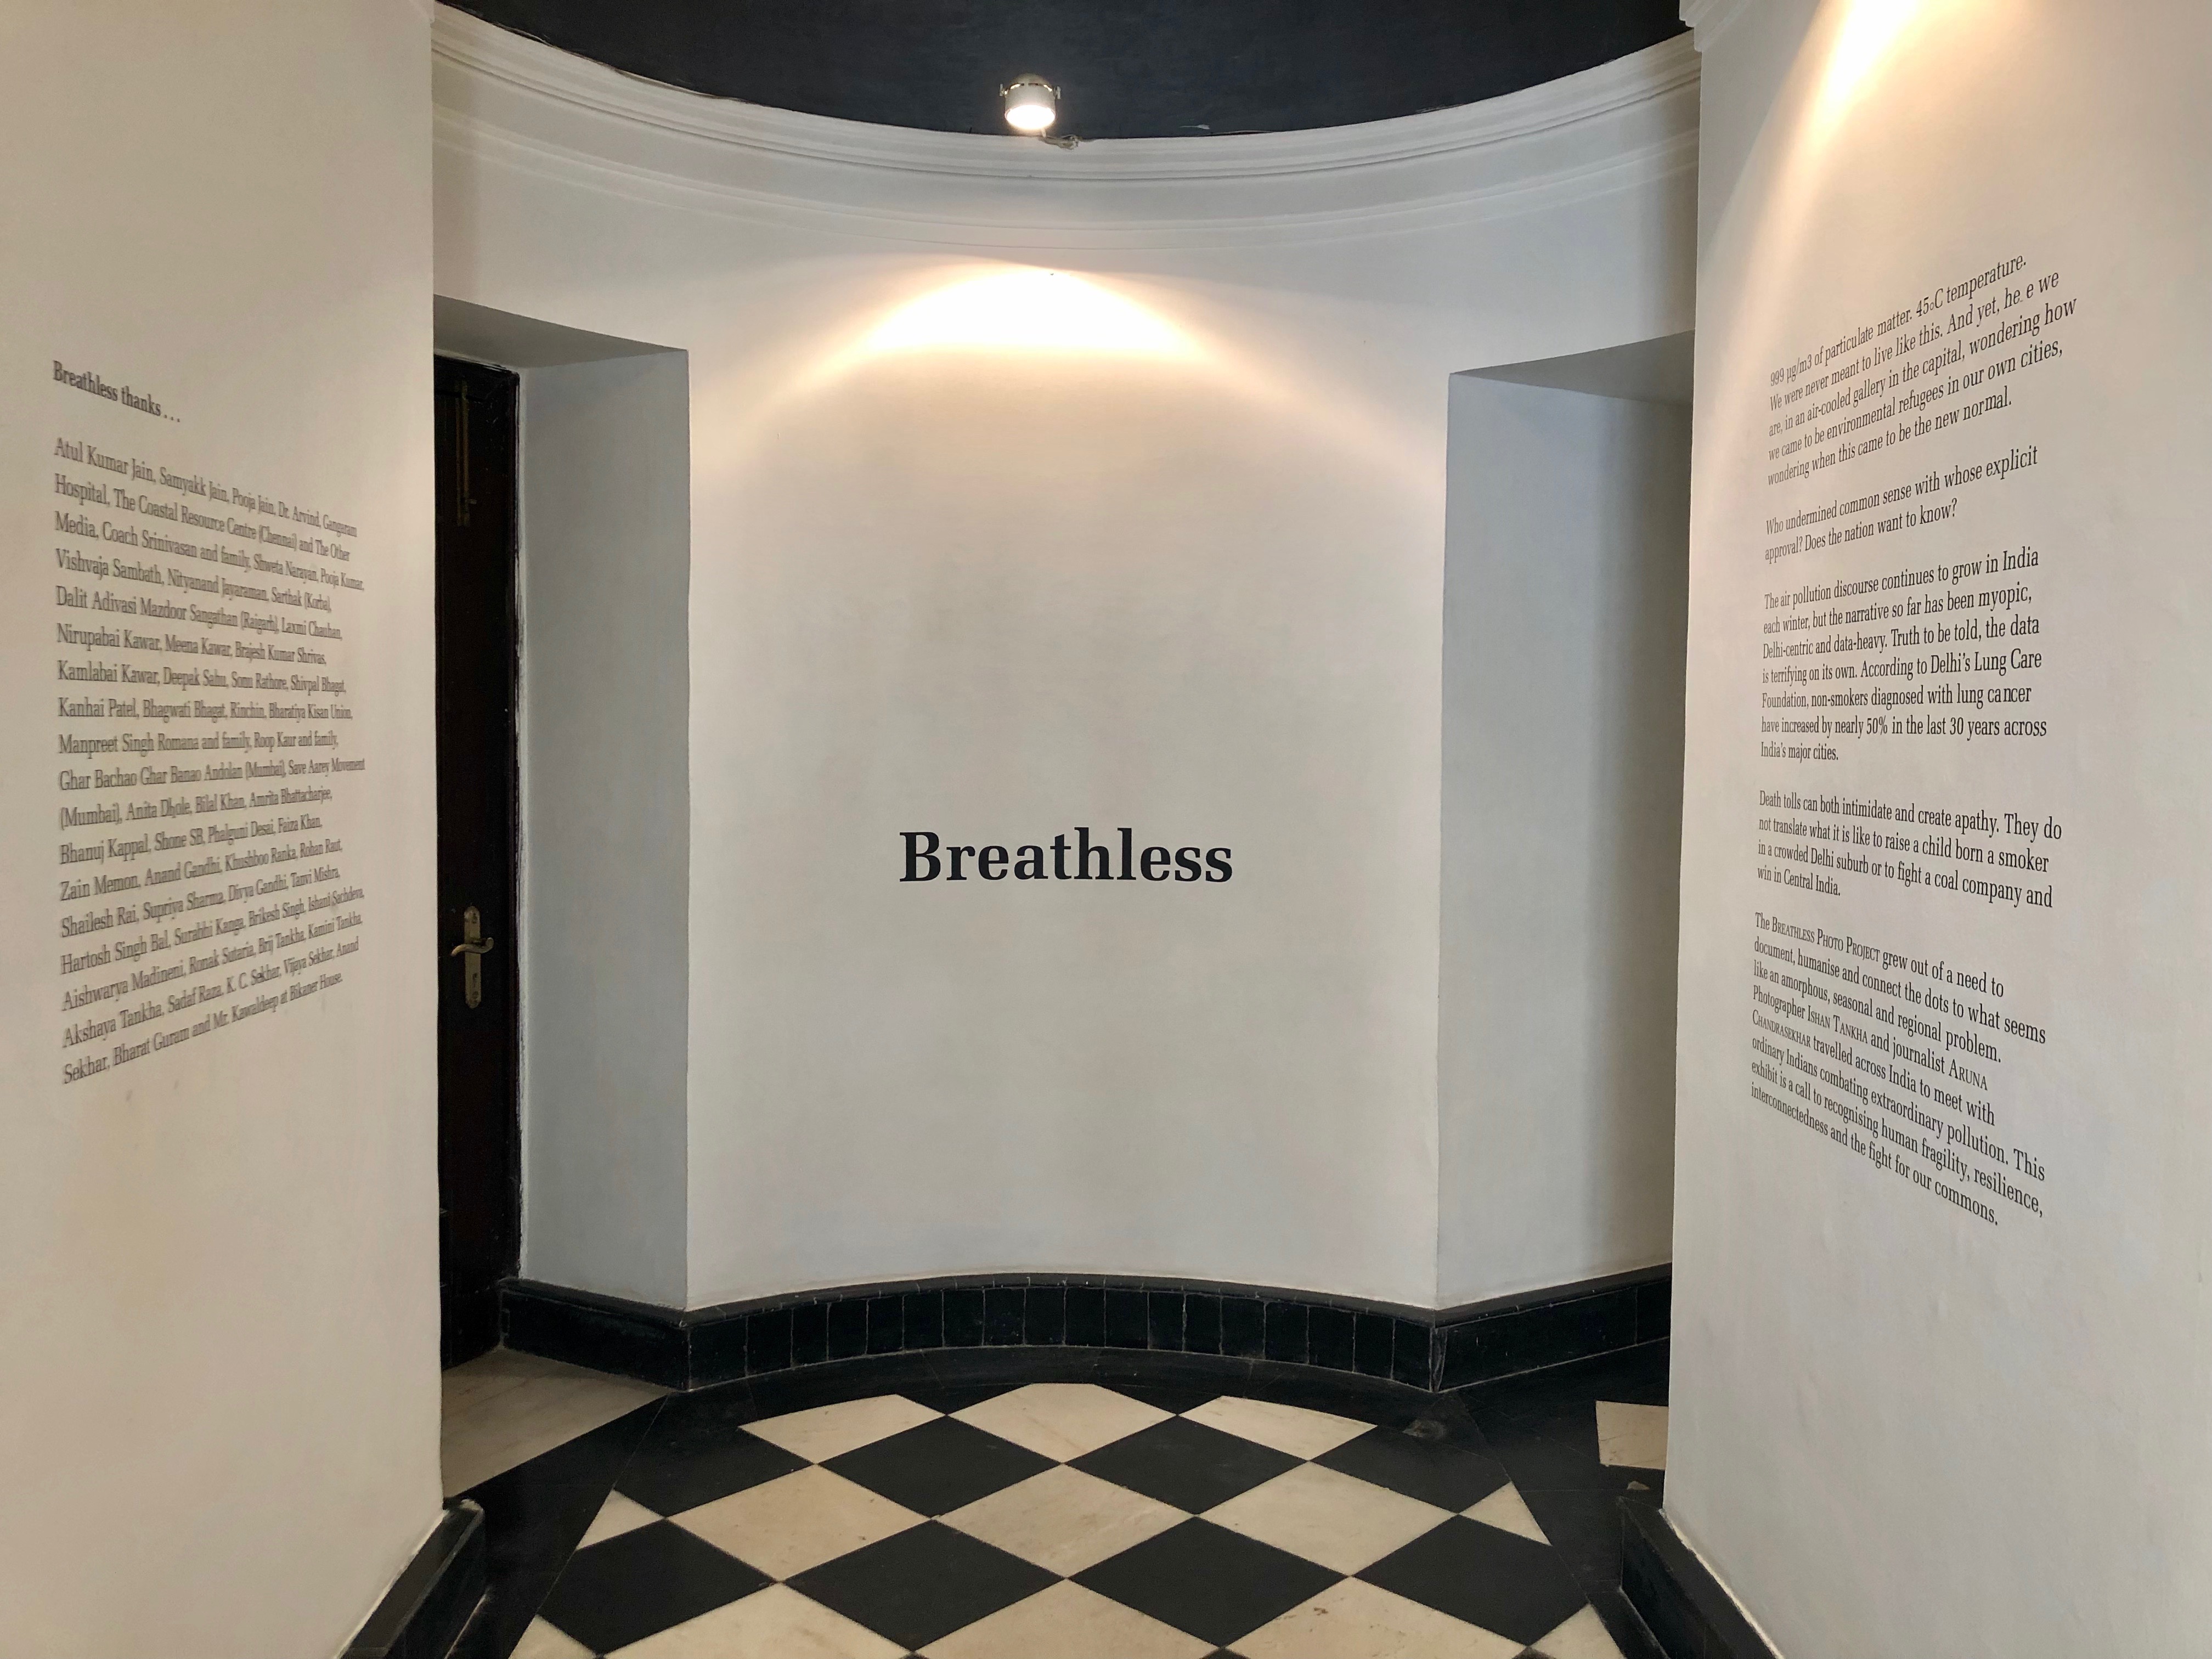 Hallway of a photo exhibit that reads "Breathless" 